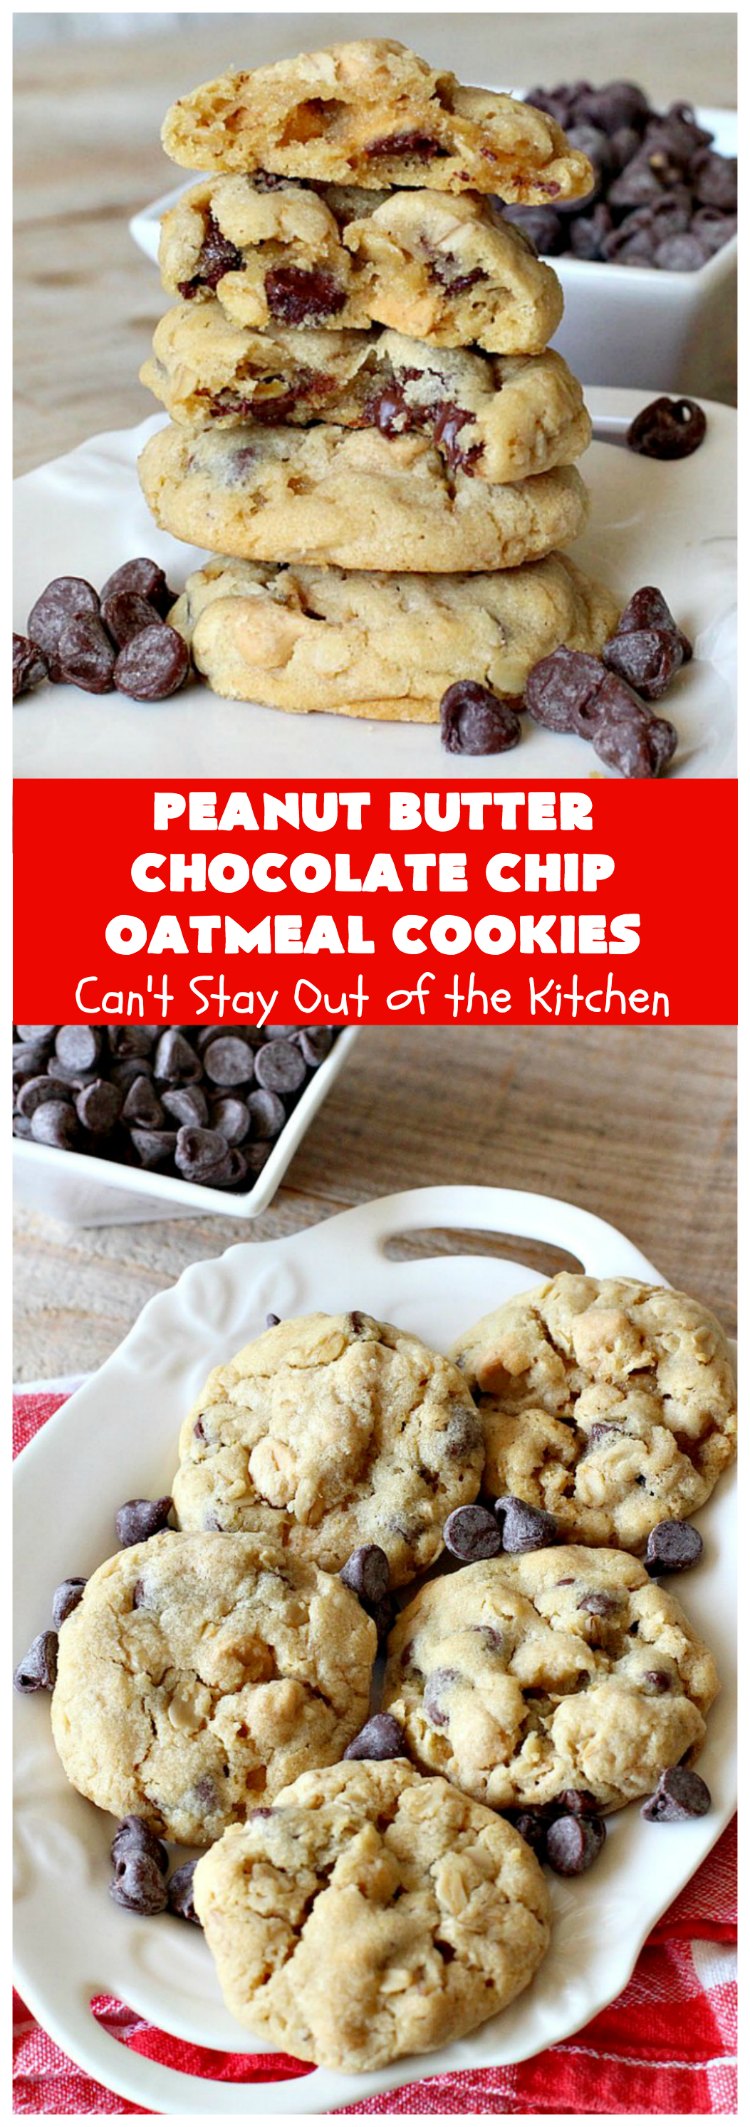 Peanut Butter Chocolate Chip Oatmeal Cookies | Can't Stay Out of the Kitchen | these scrumptious #OatmealCookies include both #ChocolateChips & #PeanutButter chips. They are fantastic for  a #ChristmasCookieExchange #holiday #baking or #tailgating parties. #cookies #dessert #HolidayDessert #PeanutButterDessert #ChocolateDessert #PeanutButterChocolateChipOatmealCookies